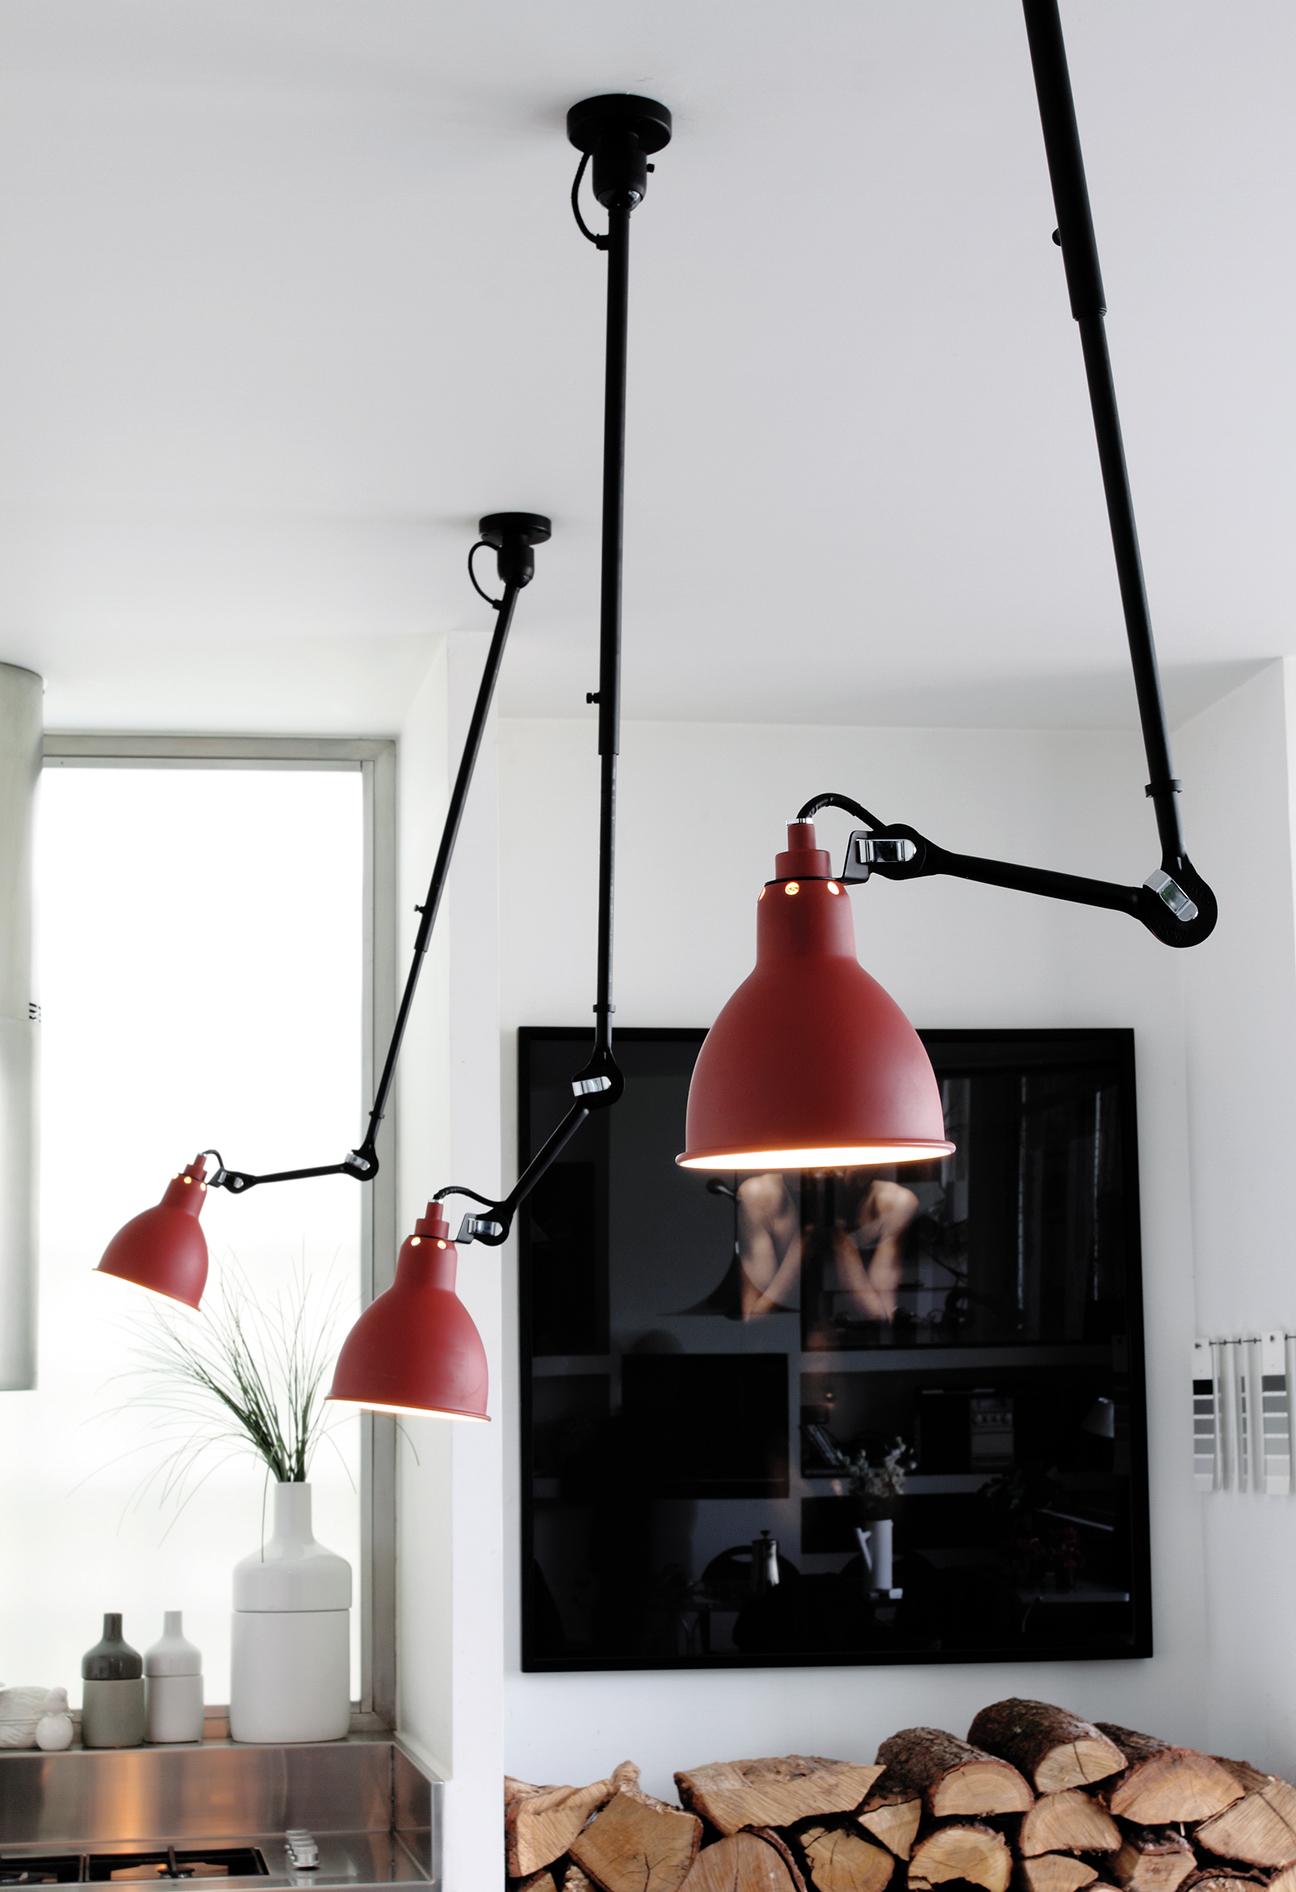 Steel DCW Editions La Lampe Gras N°302 Pendant Light in Black Arm and Blue Shade For Sale